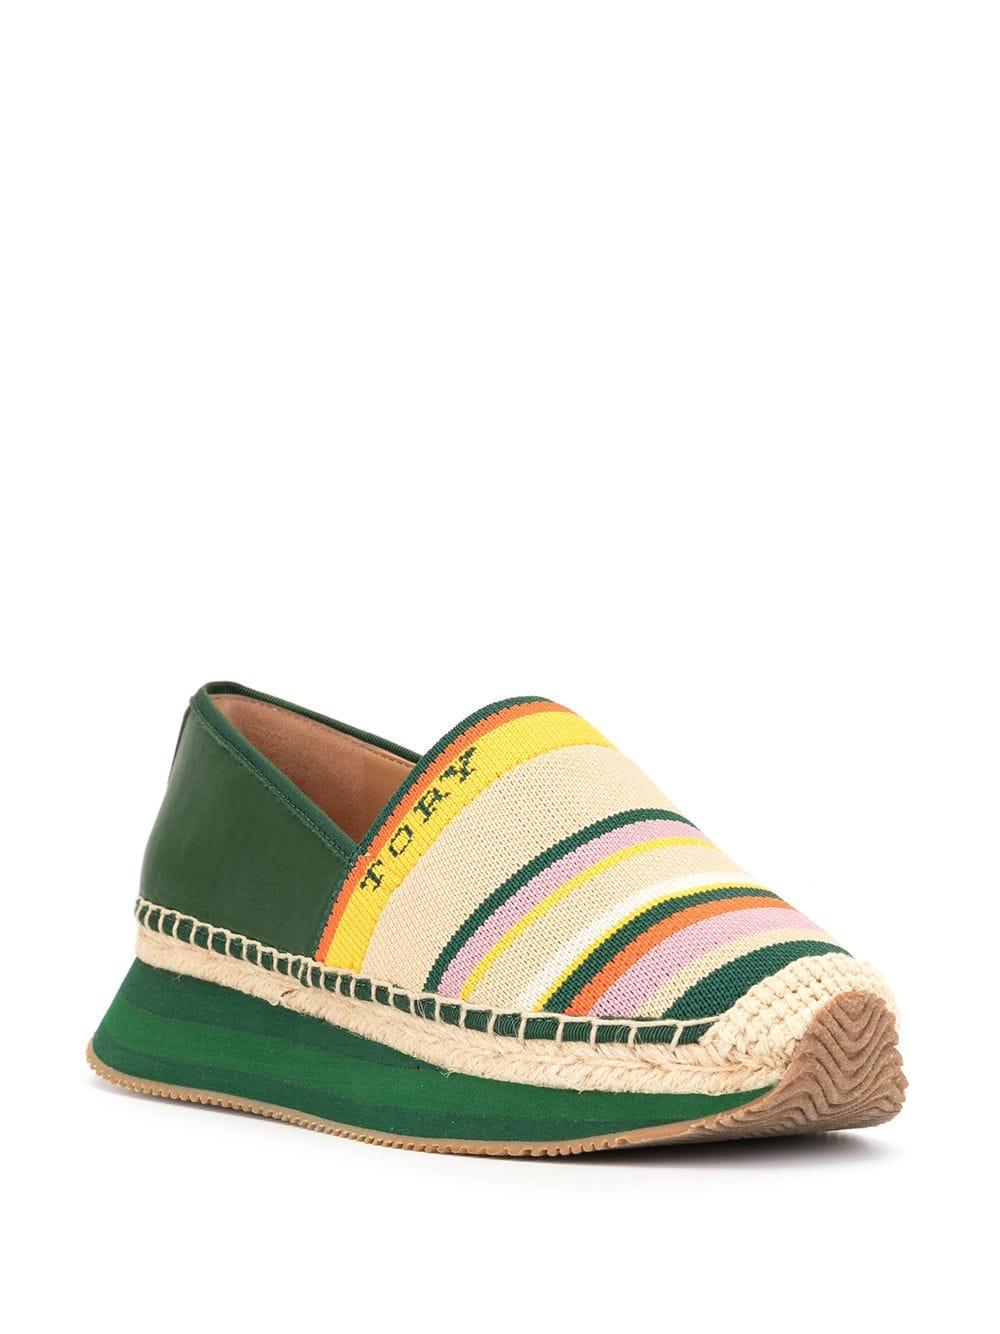 Tory Burch Synthetic Woven Striped Espadrilles in Green - Lyst